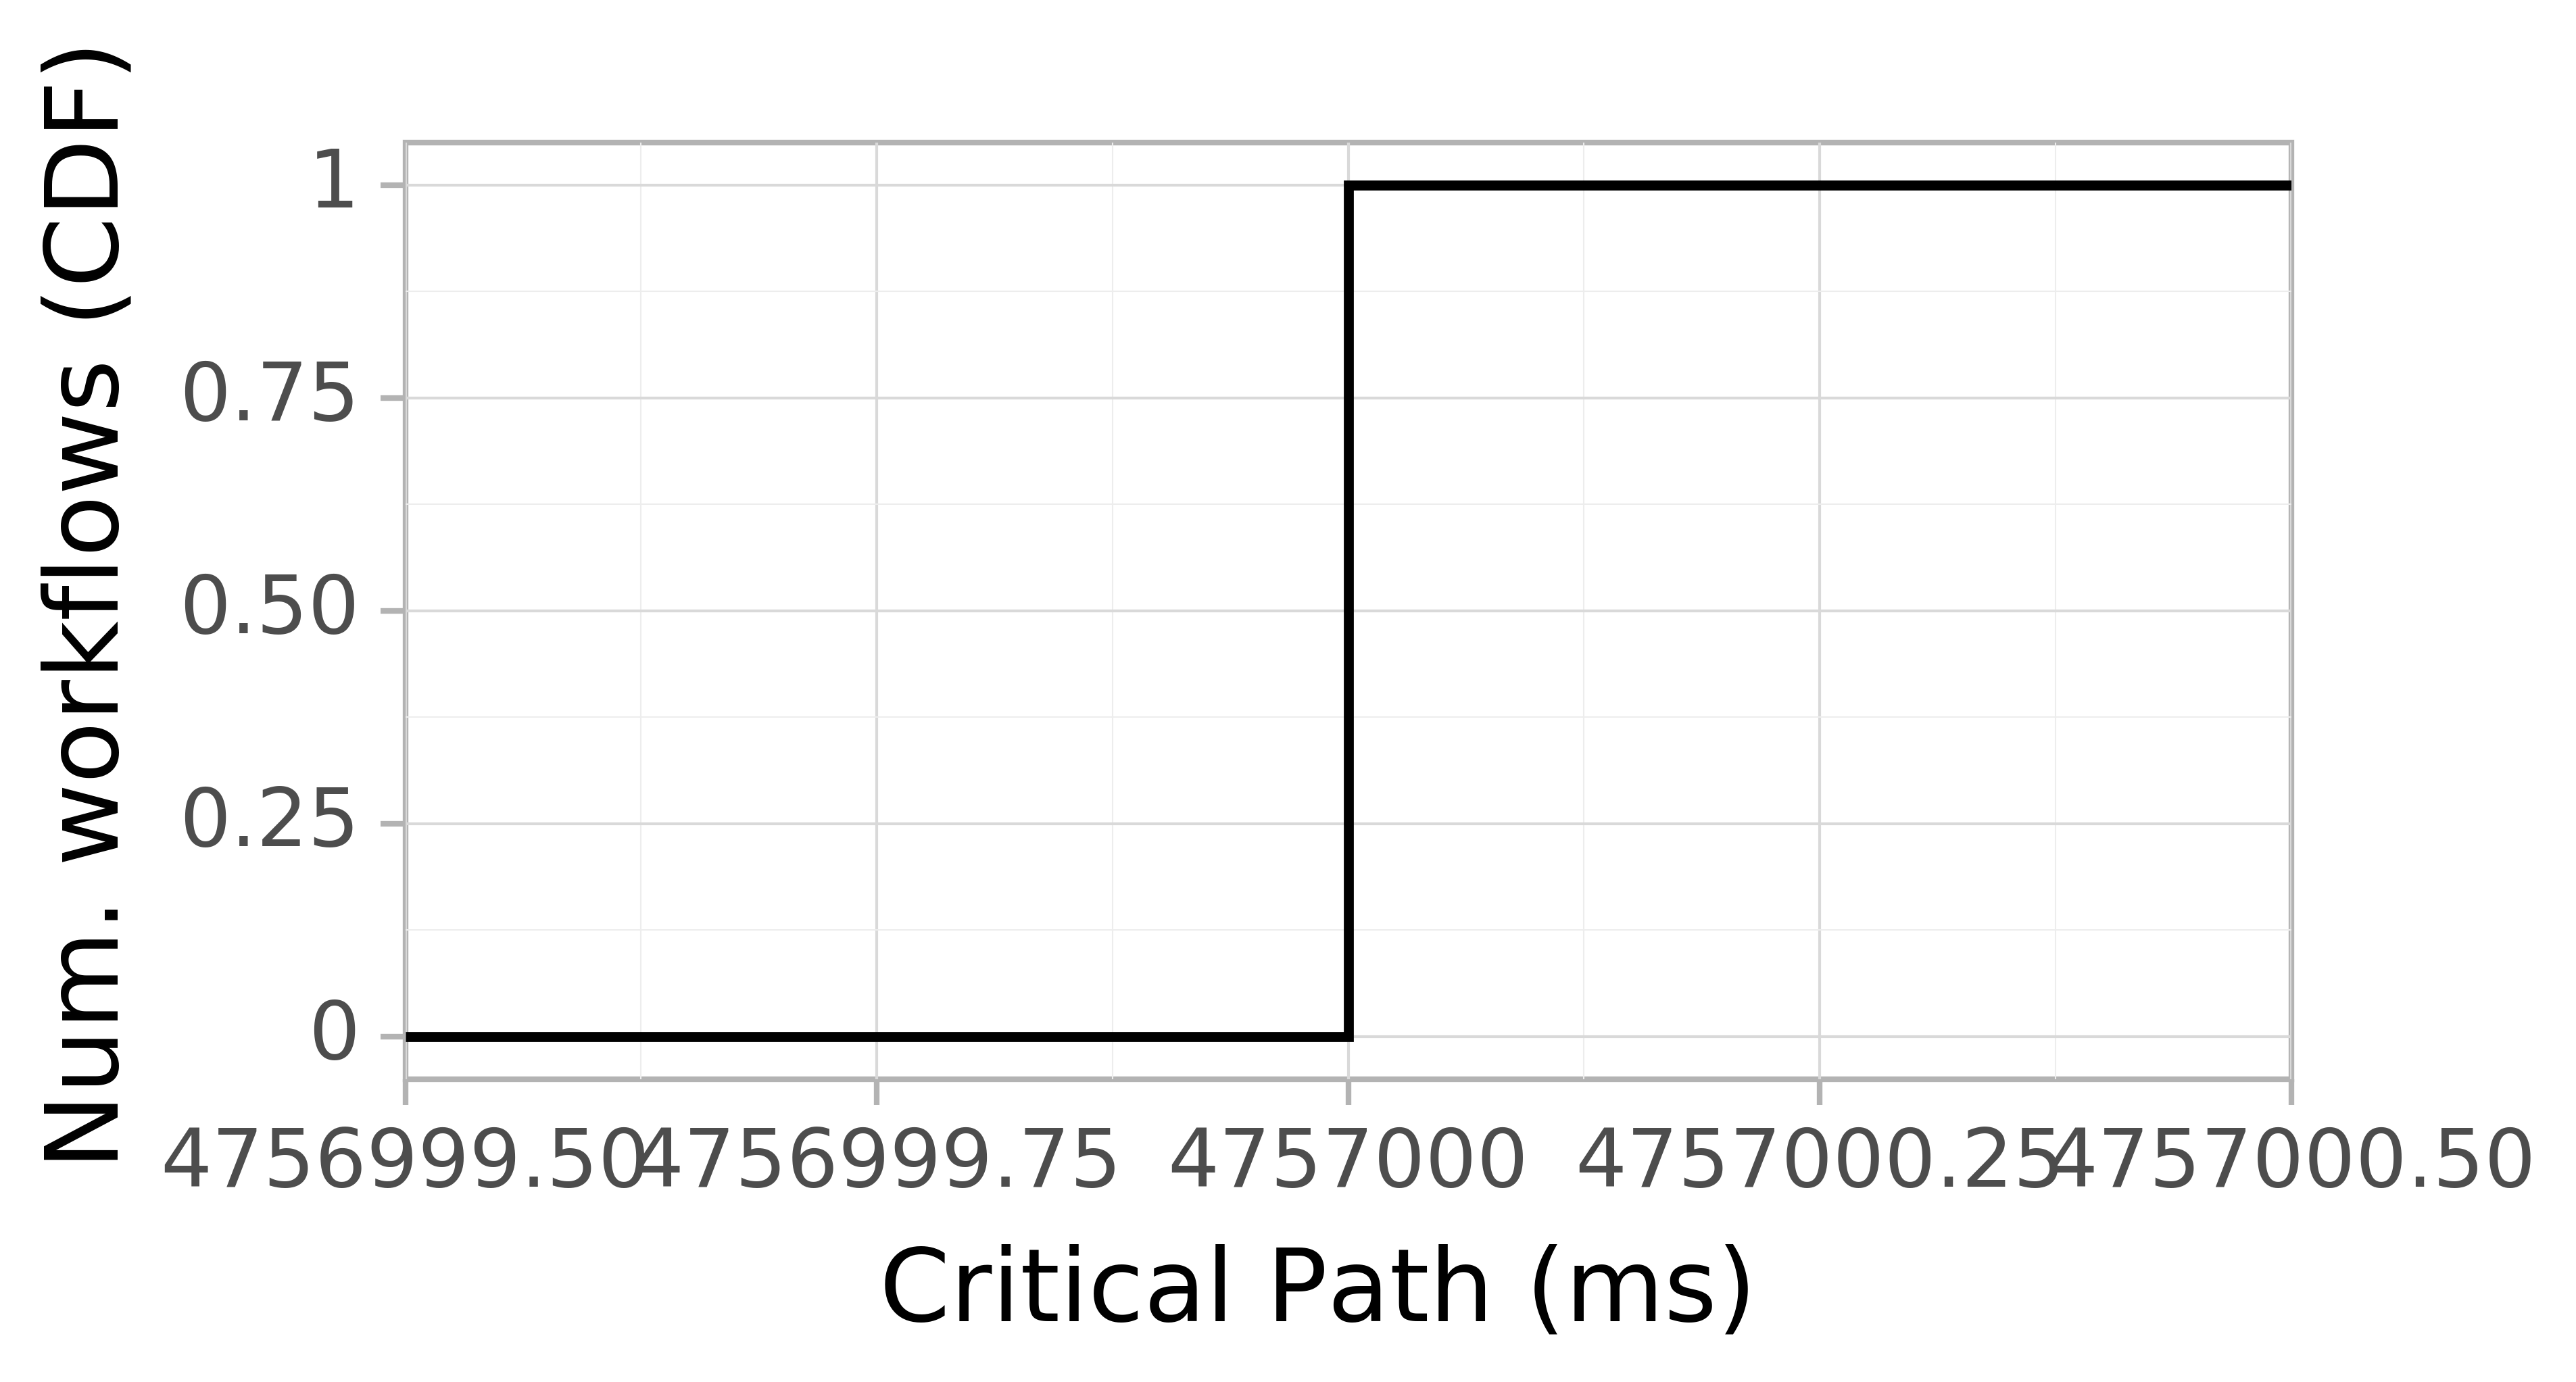 Job runtime CDF graph for the Pegasus_P5 trace.